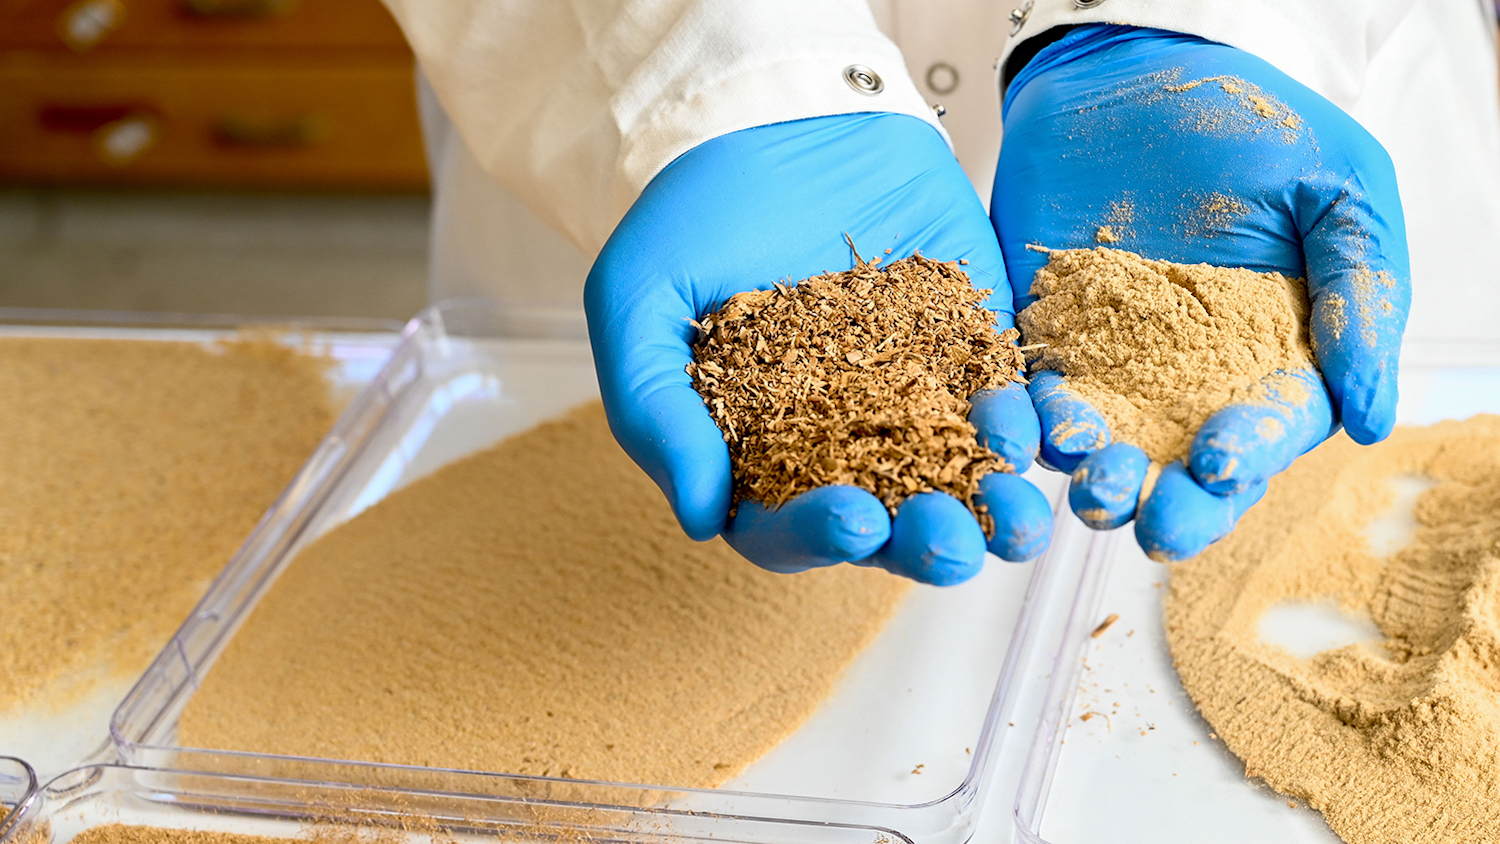 NC State researchers have discovered how to convert leftover sawdust powder and agro-residues into a Styrofoam-like packaging material.